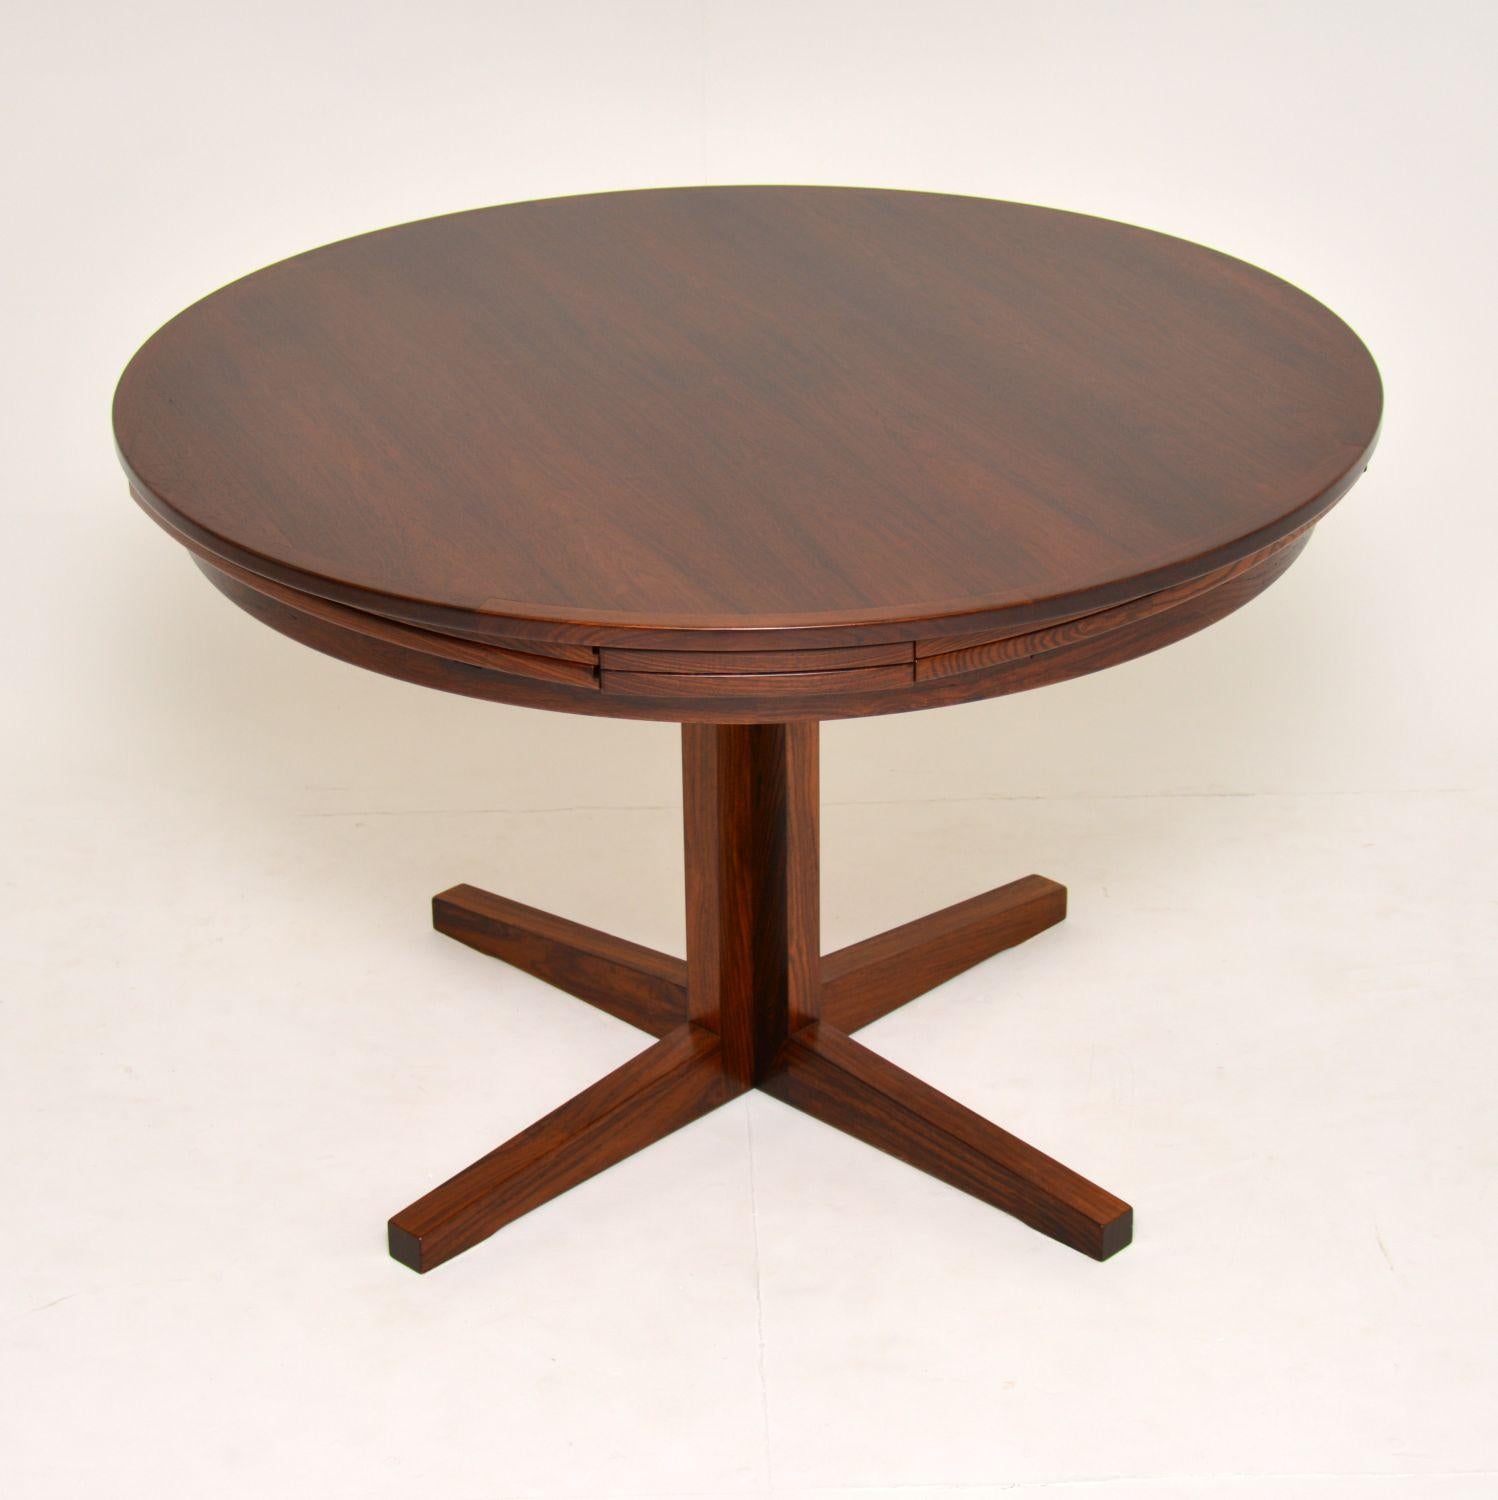 A stunning Danish wooden dining table by Dyrlund, this is the famous flip flap lotus table, it dates from the 1960’s. This is a very rare version, with a single column pedestal and a slightly smaller top and leaves than normal. The quality is